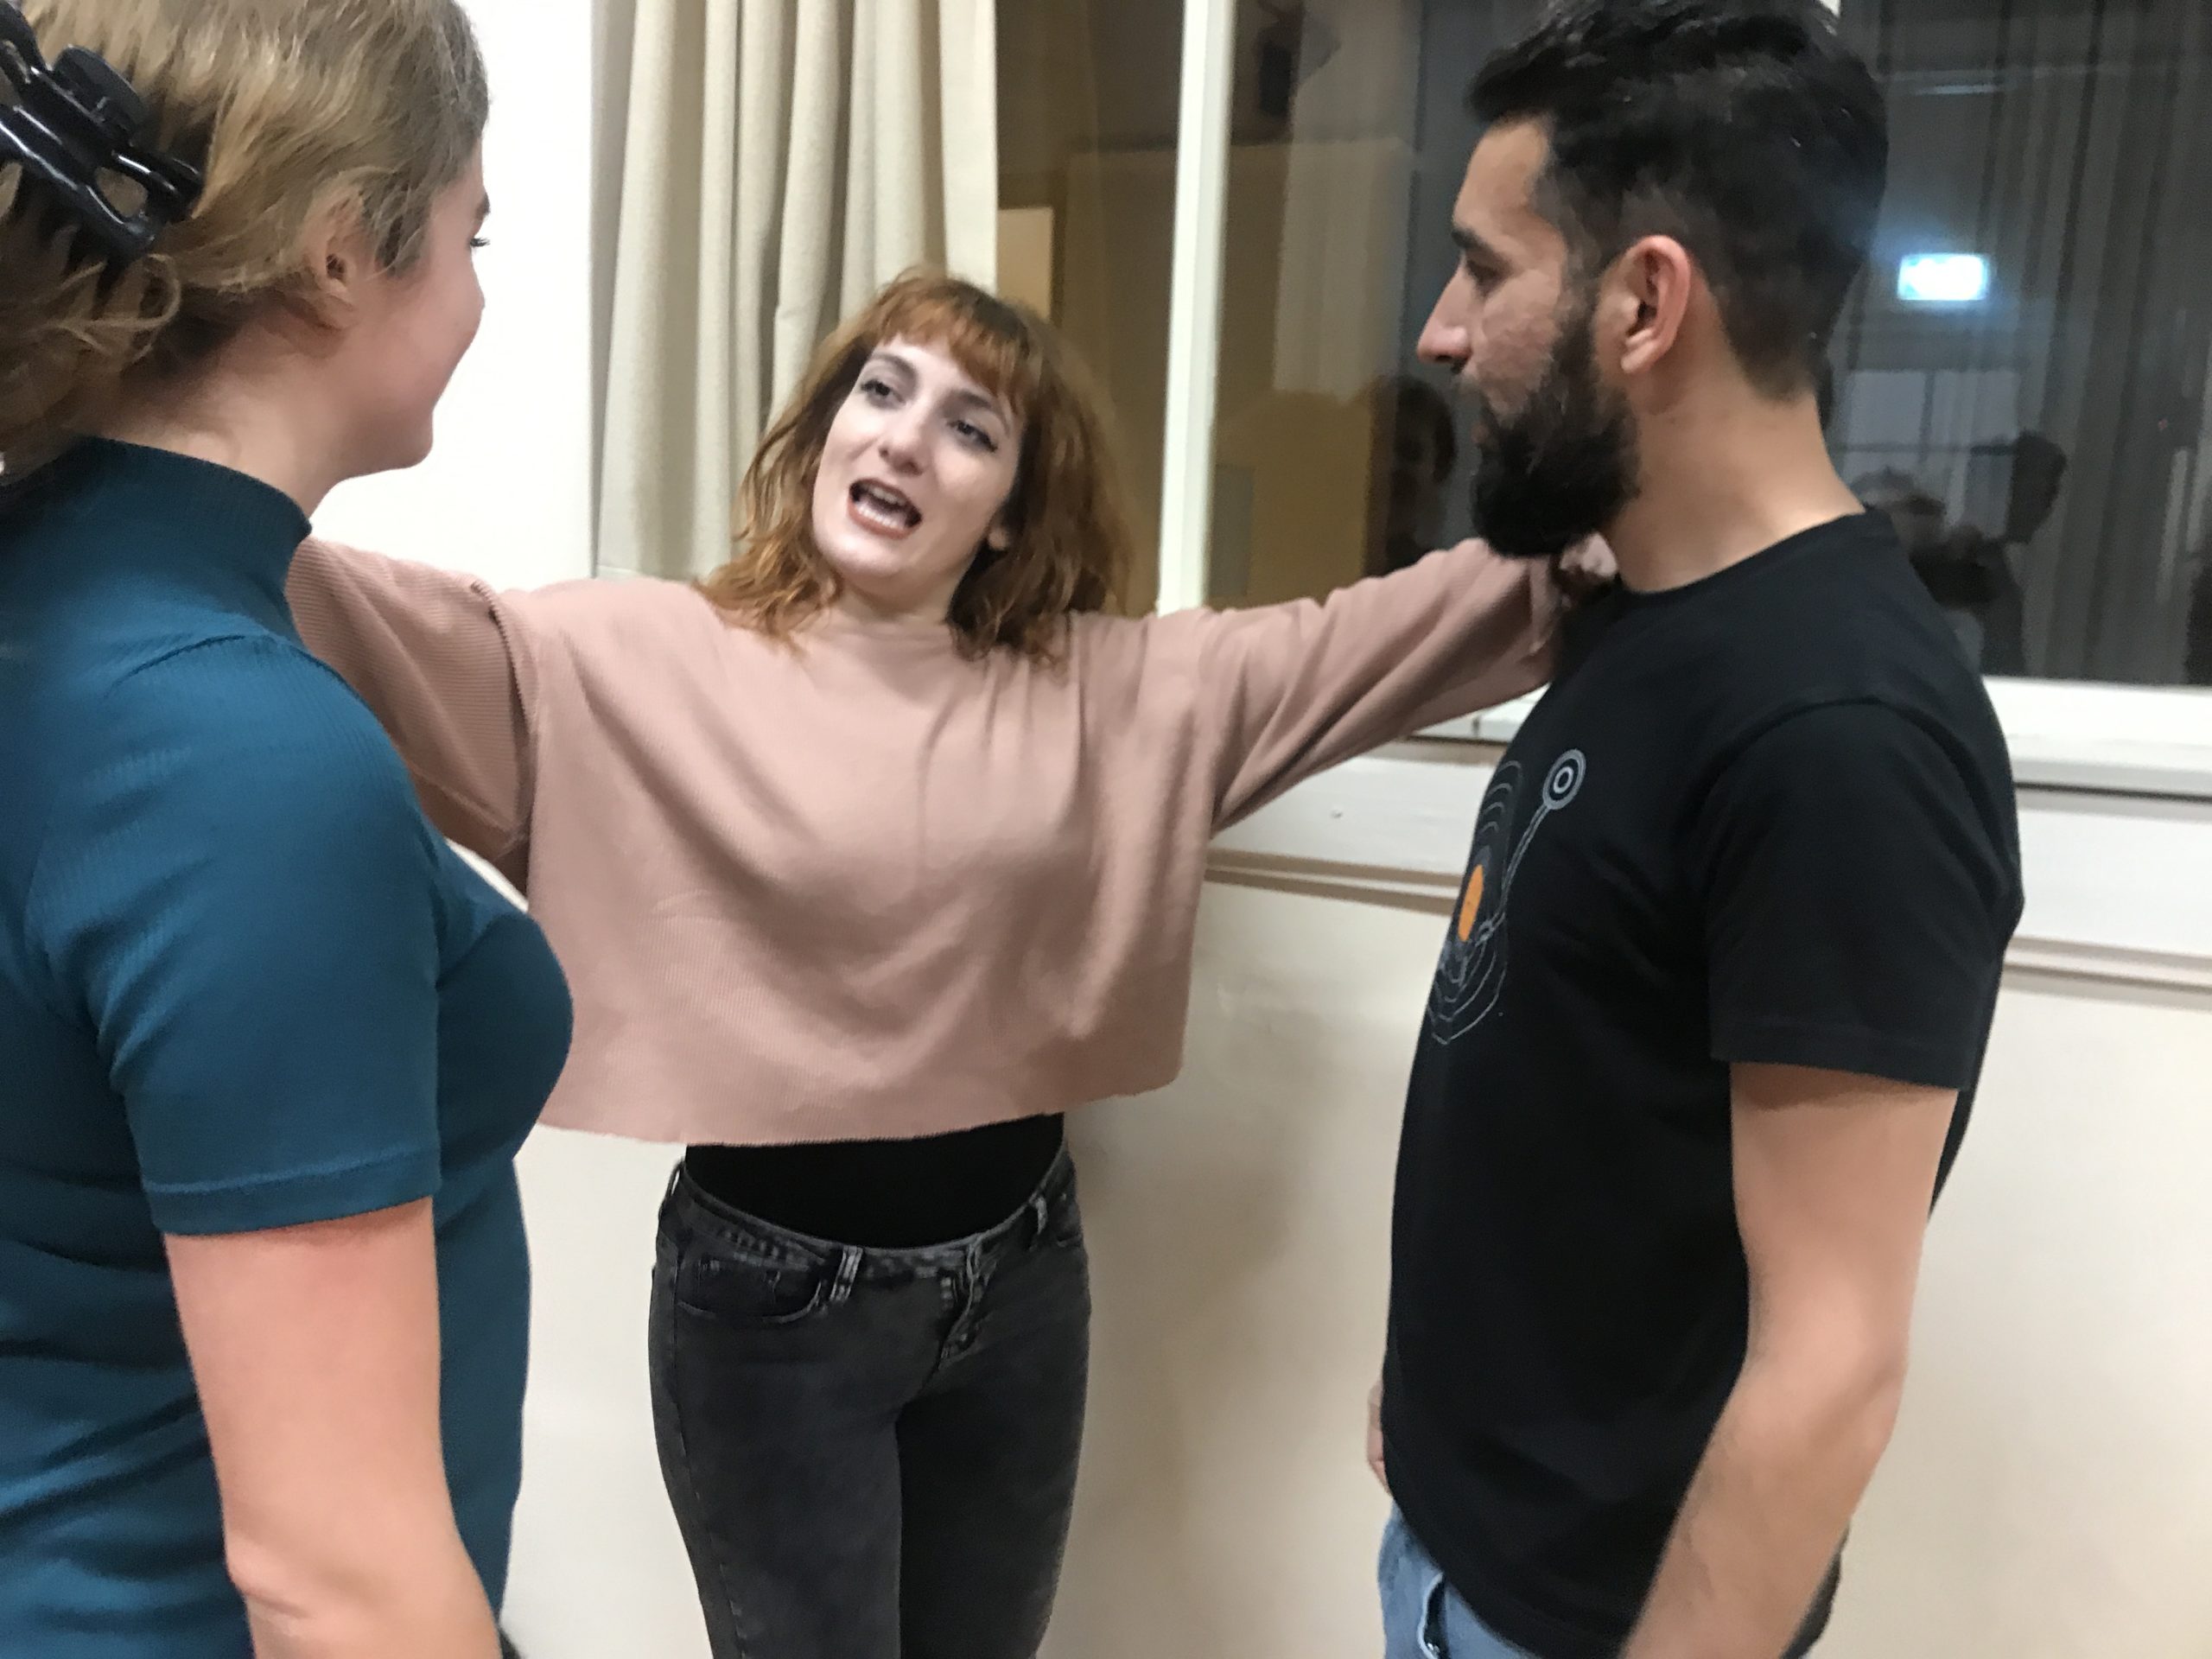 Act Attack's Improv Class. A woman in the middle reaches her arms to touch a woman to her right and a man to her left. She looks at the woman on her right, speaking to her